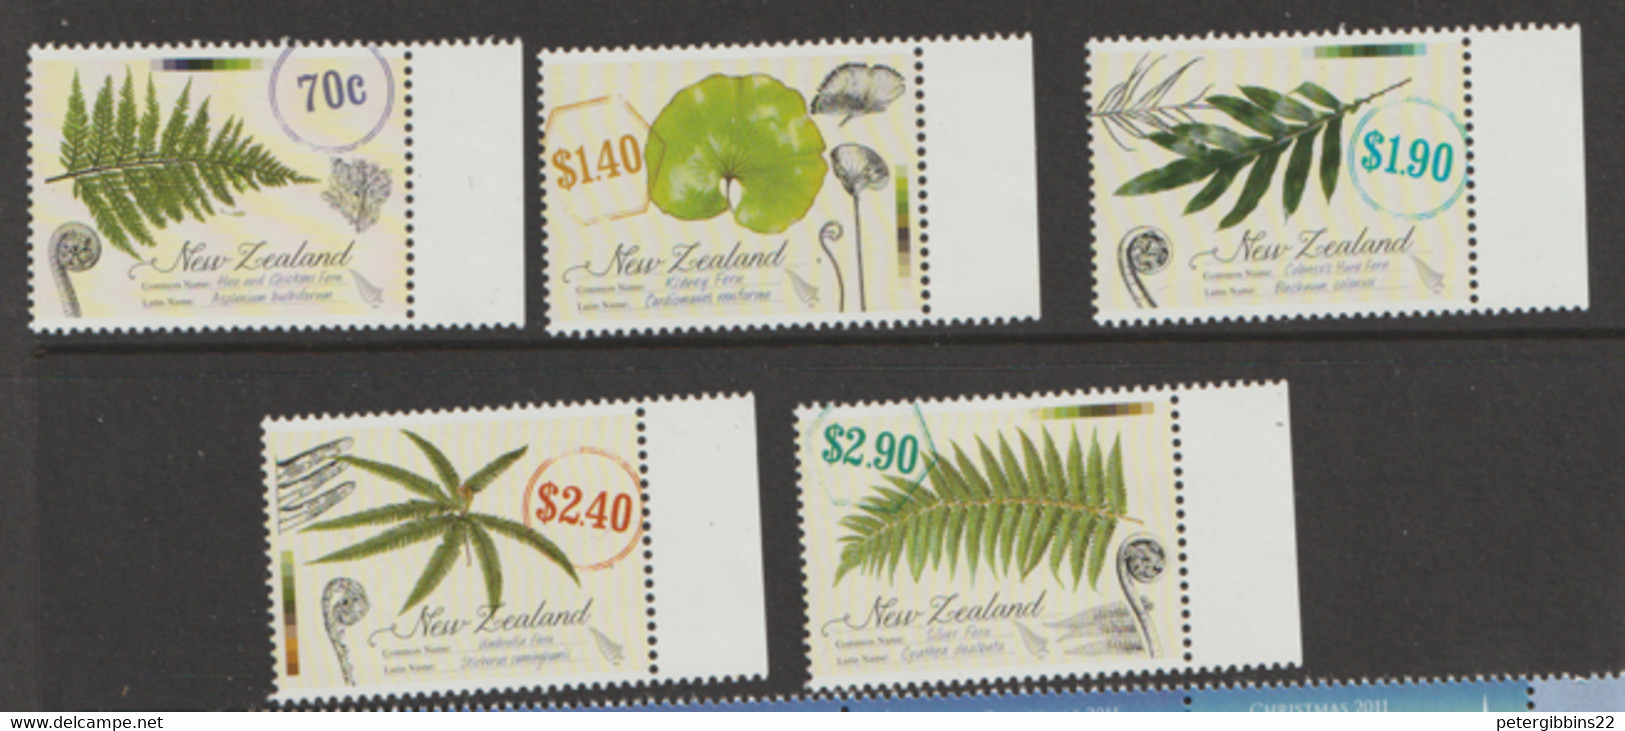 New Zealand  2013 SG  3429-33  Ferns  Marginal  Unmounted Mint - Used Stamps